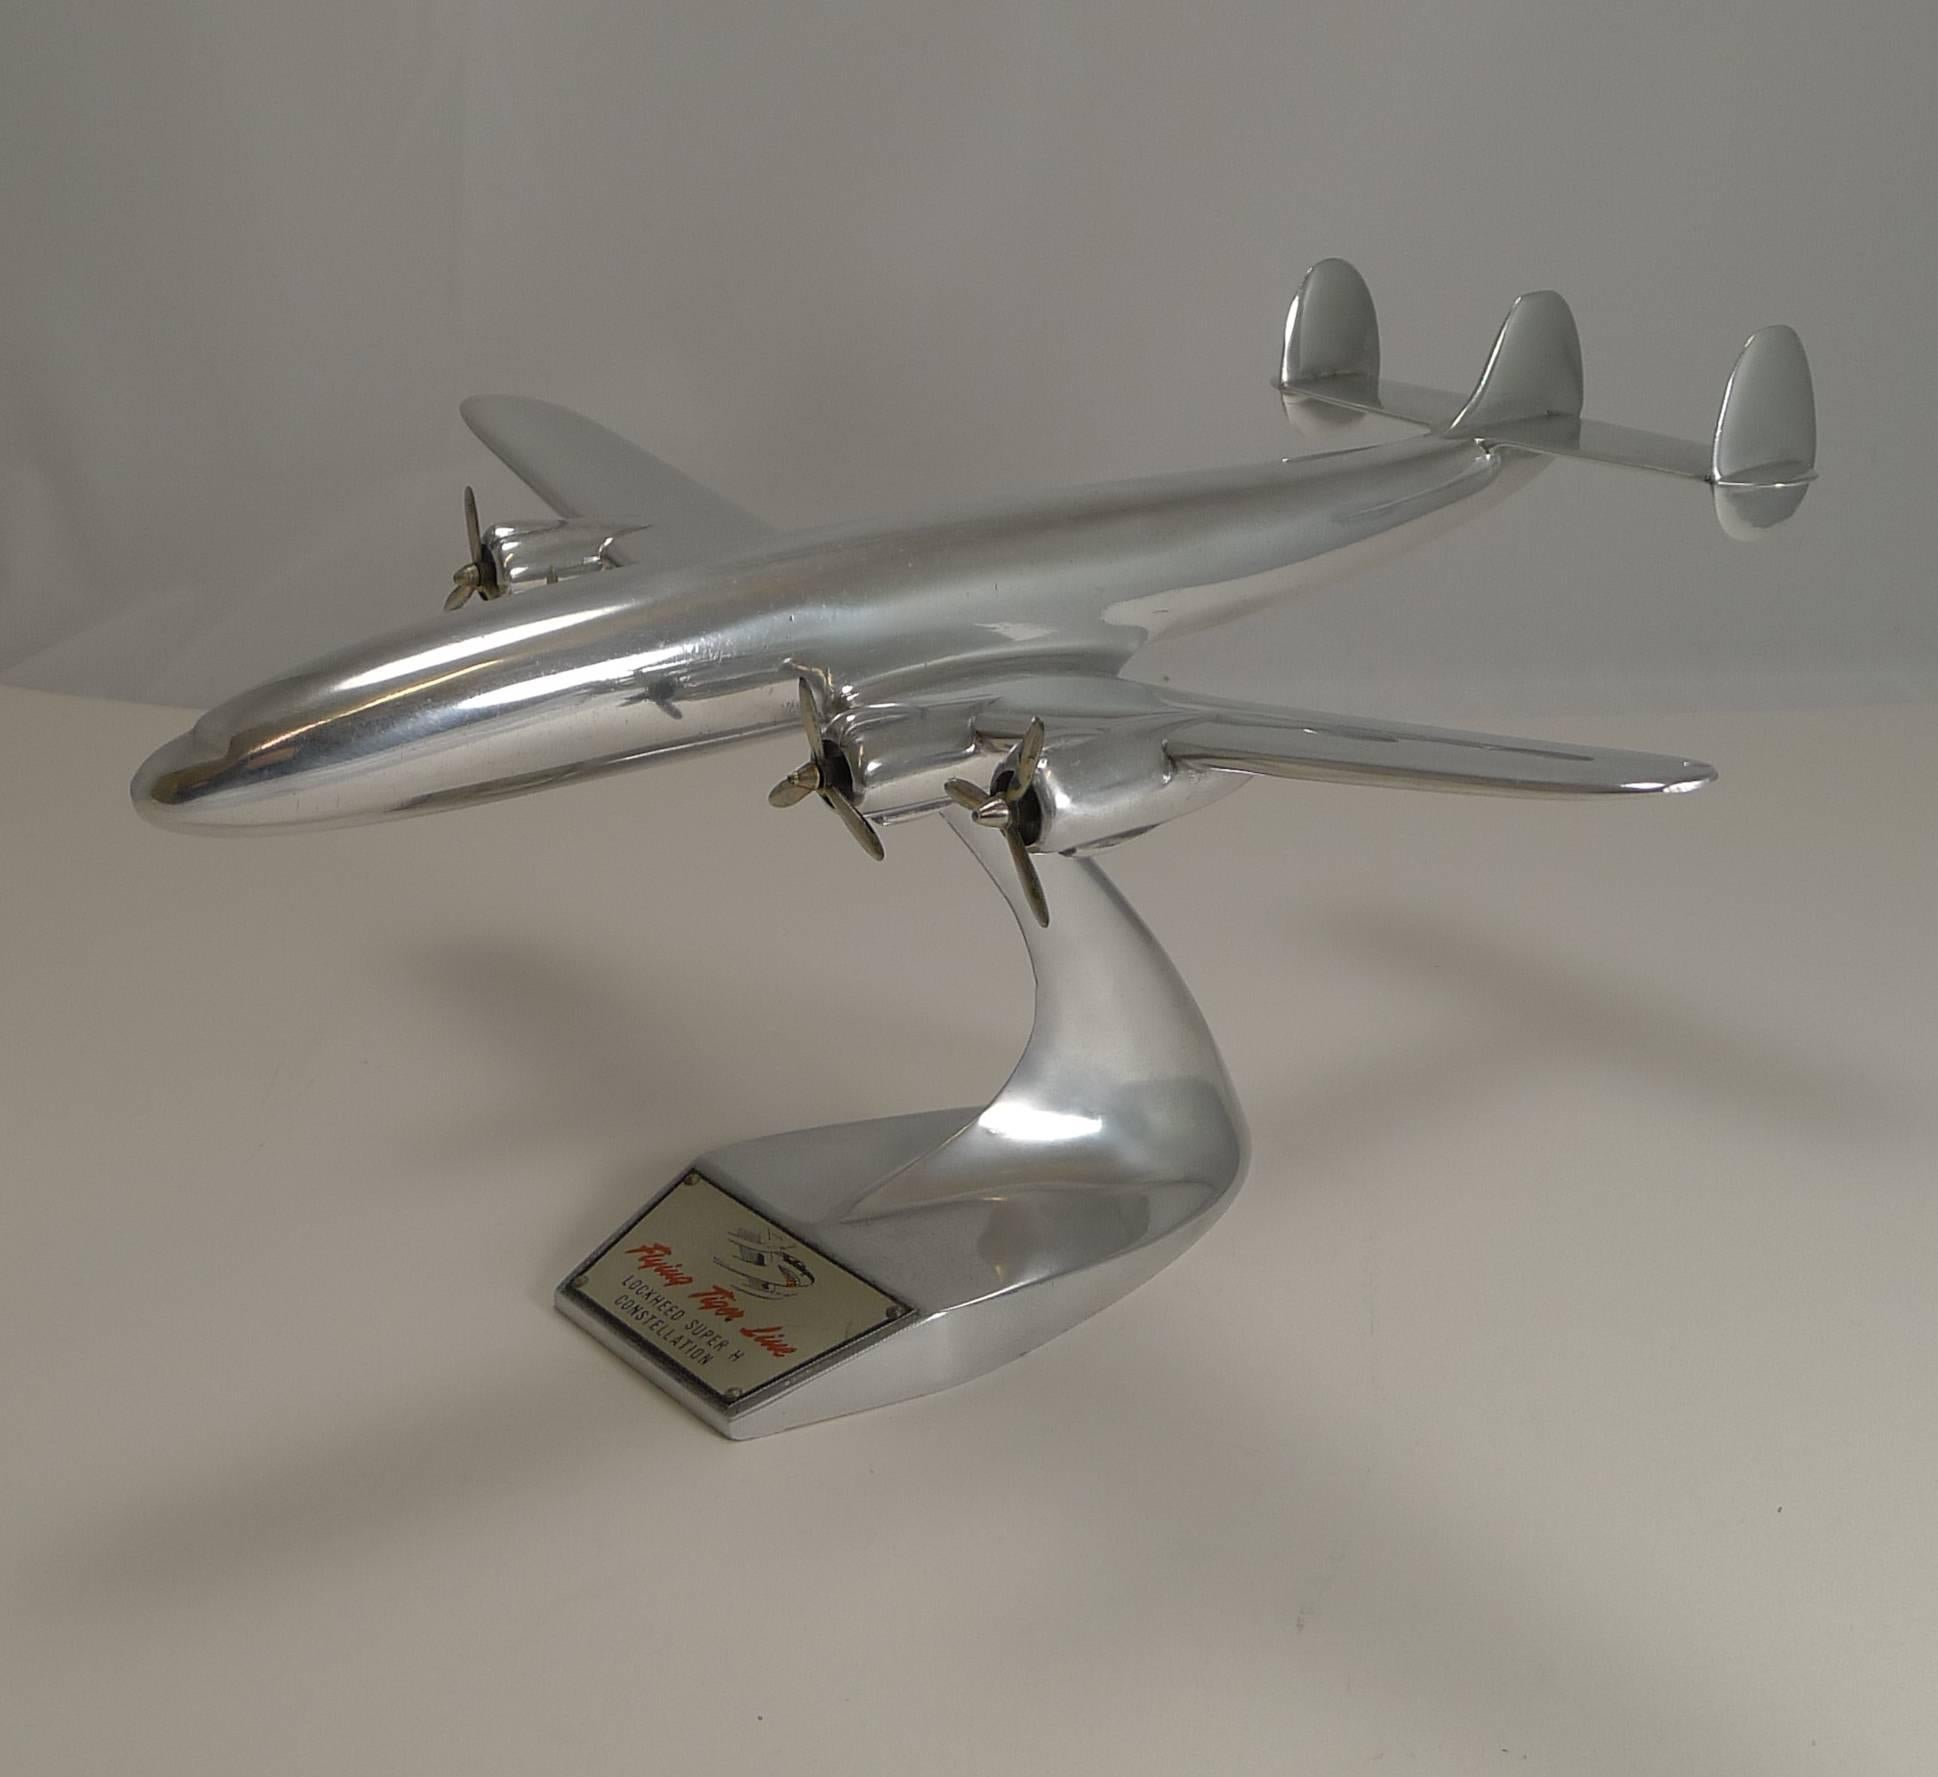 A handsome and highly collectable polished aluminium aircraft model on a detachable stand and retaining it's original label to the front.

The Lockheed Super H Constellation, airlifting 43,000 pounds of freight at 300 miles per hour over a